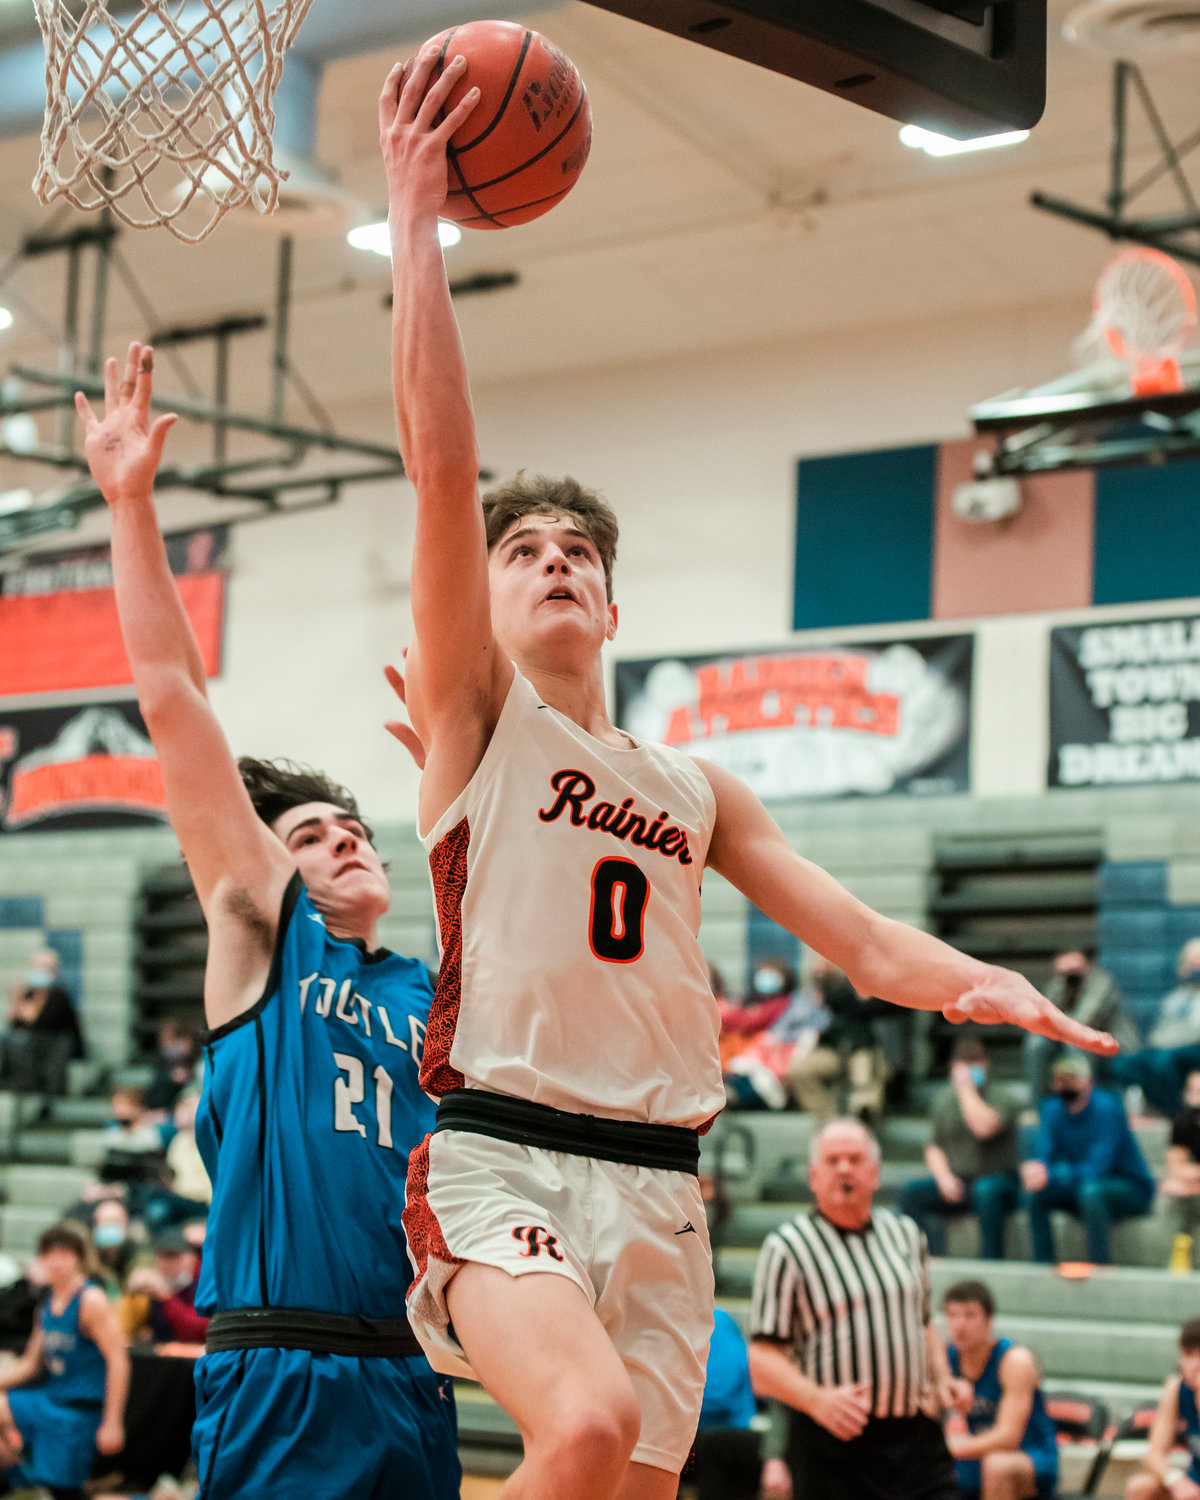 Rainier’s Ian Sprouffske (0) goes up with the ball to score during a game Thursday night.